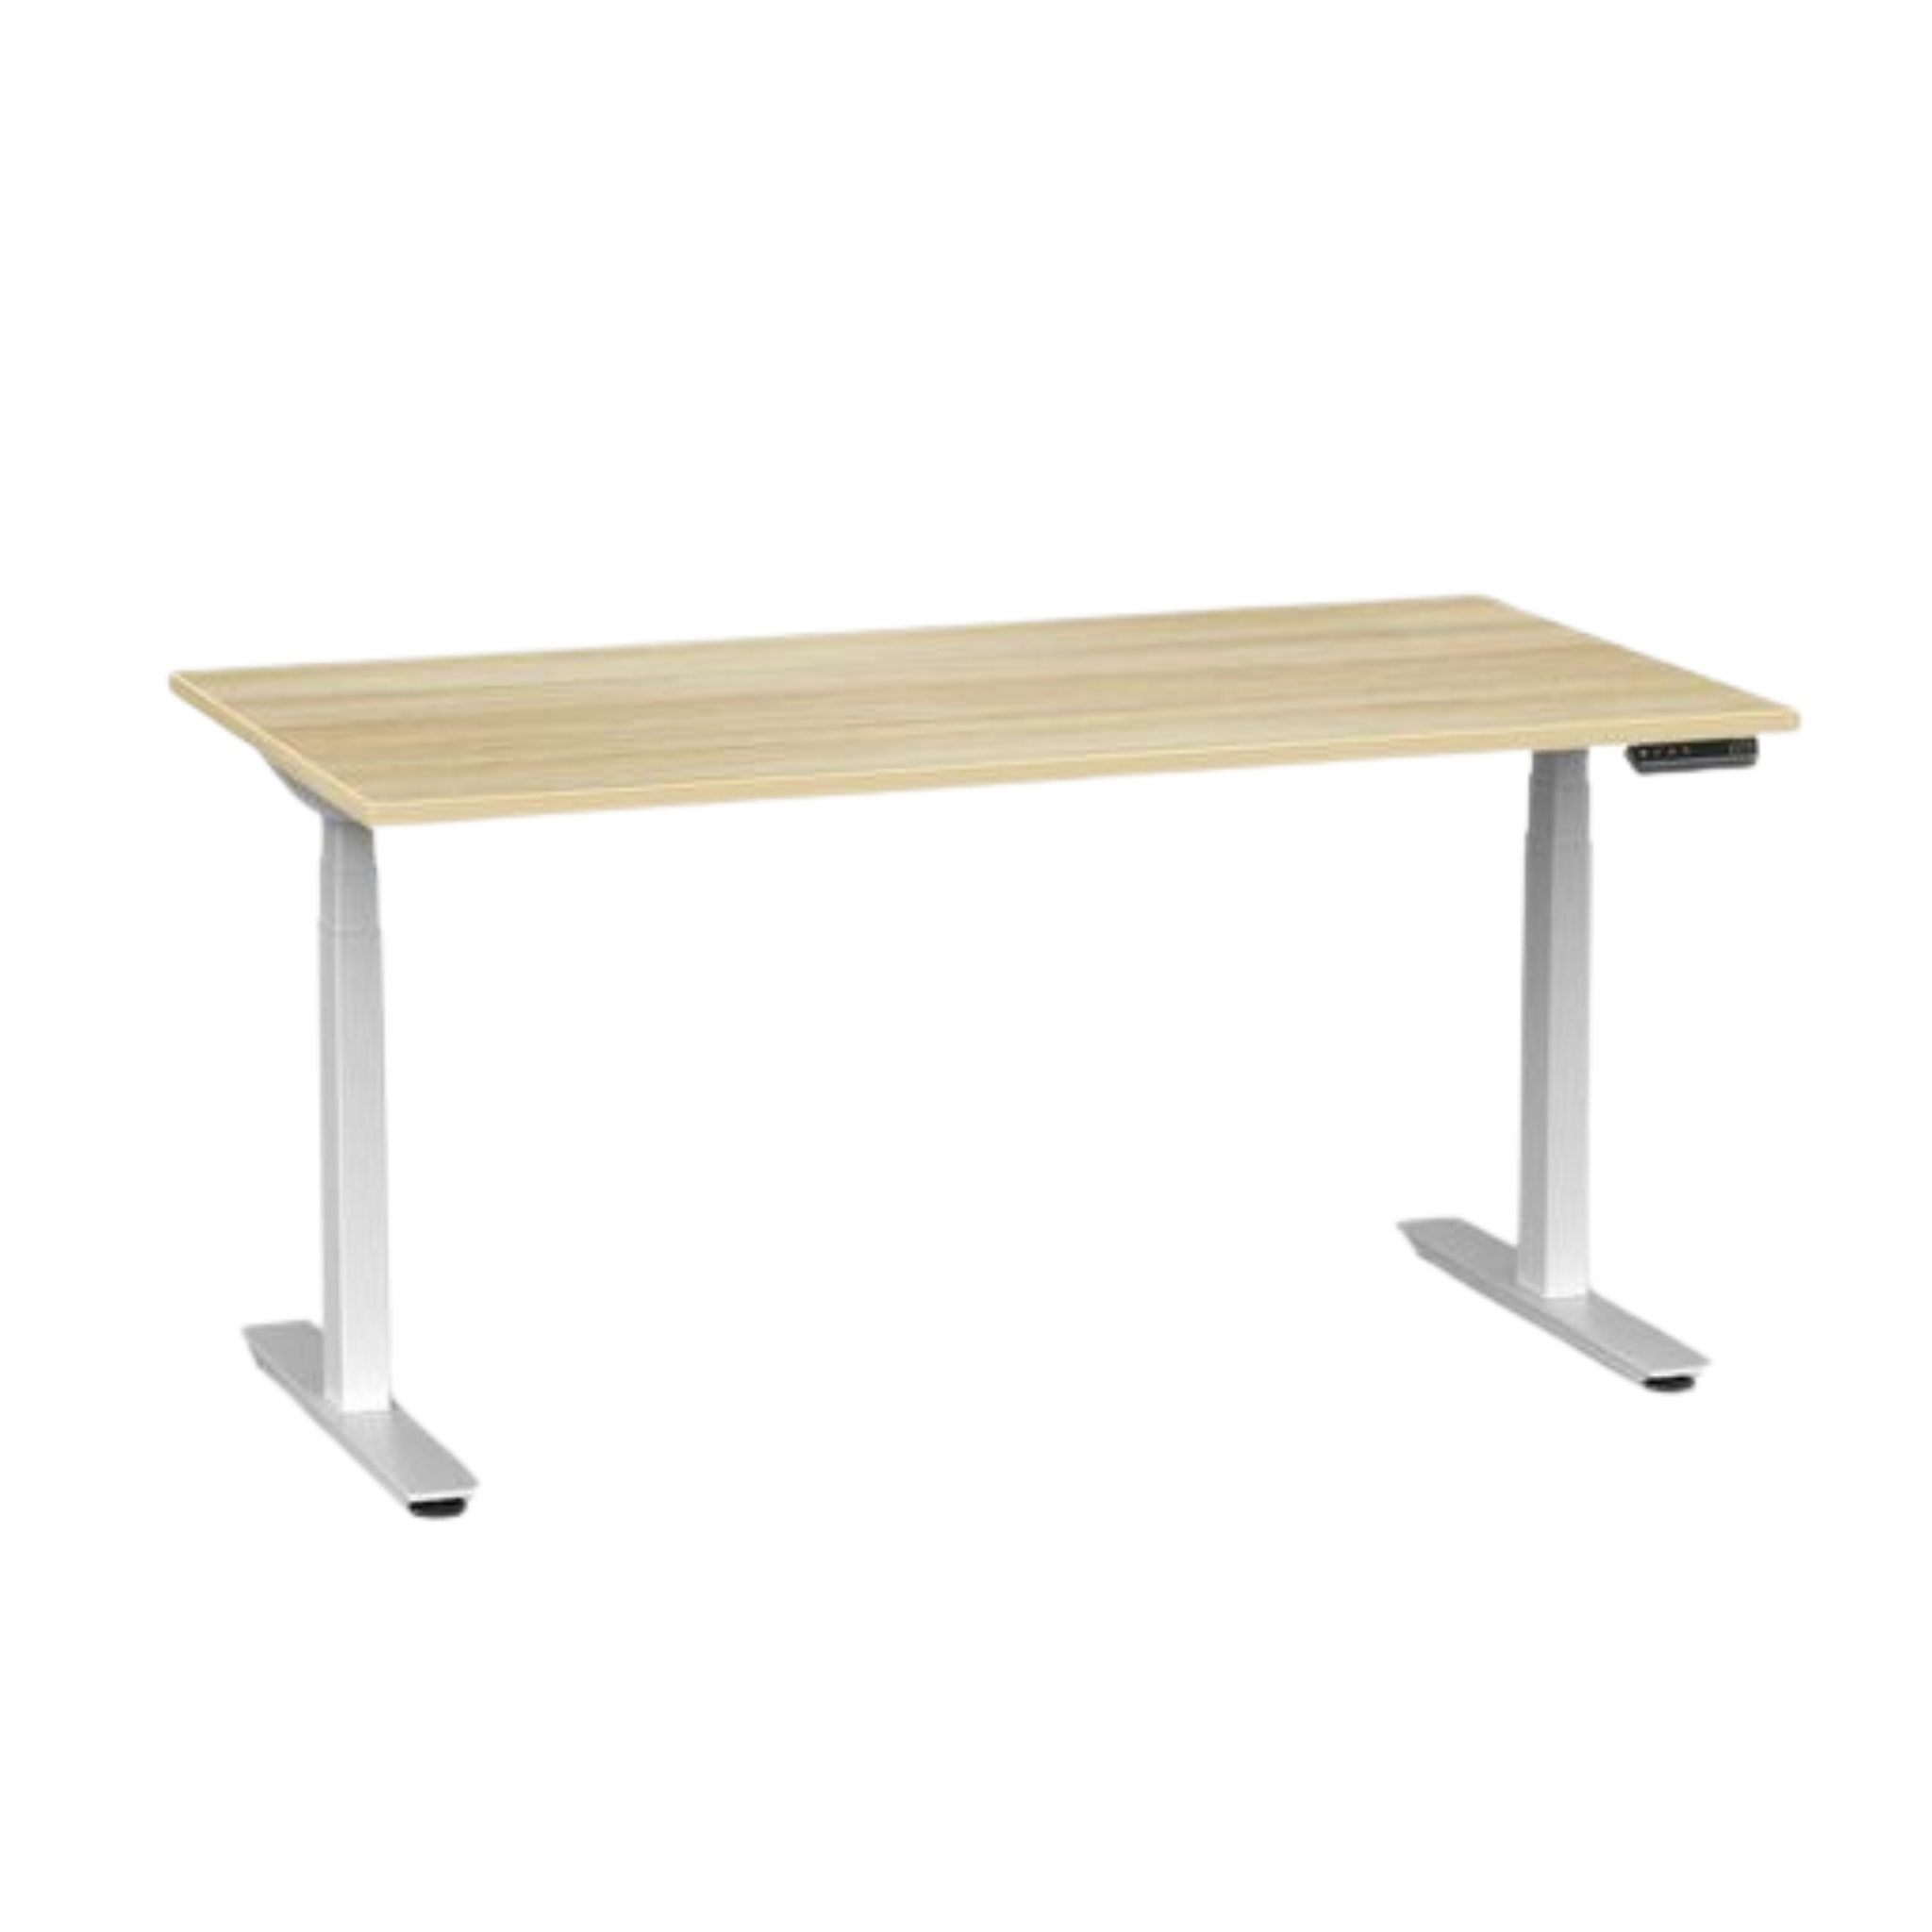 Agile Pro electric sit to stand desk with white frame and atlantic oak top